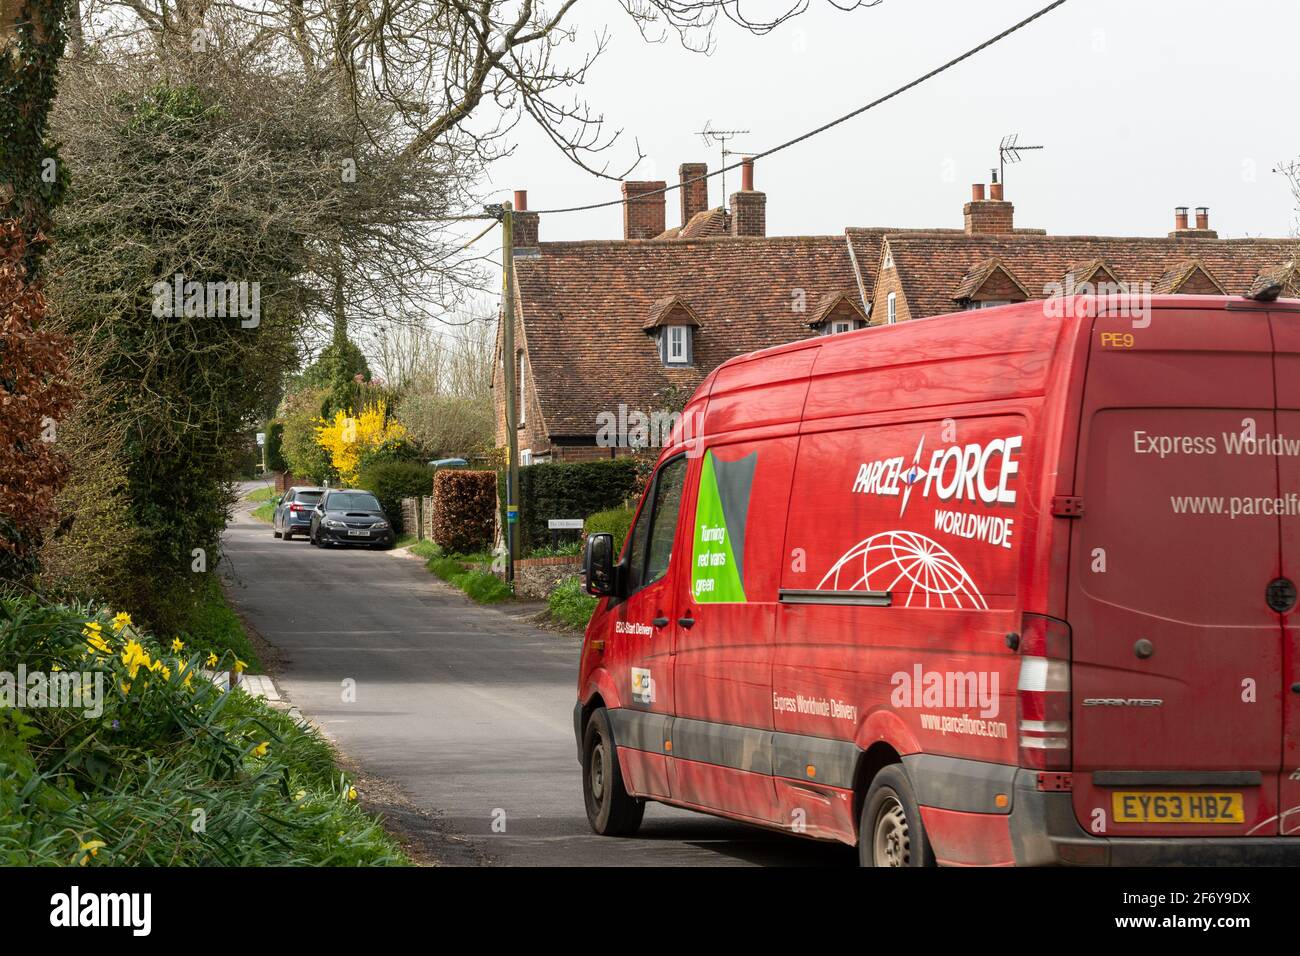 Parcelforce worldwide red van driving through the Hampshire village of Dummer, England, UK Stock Photo